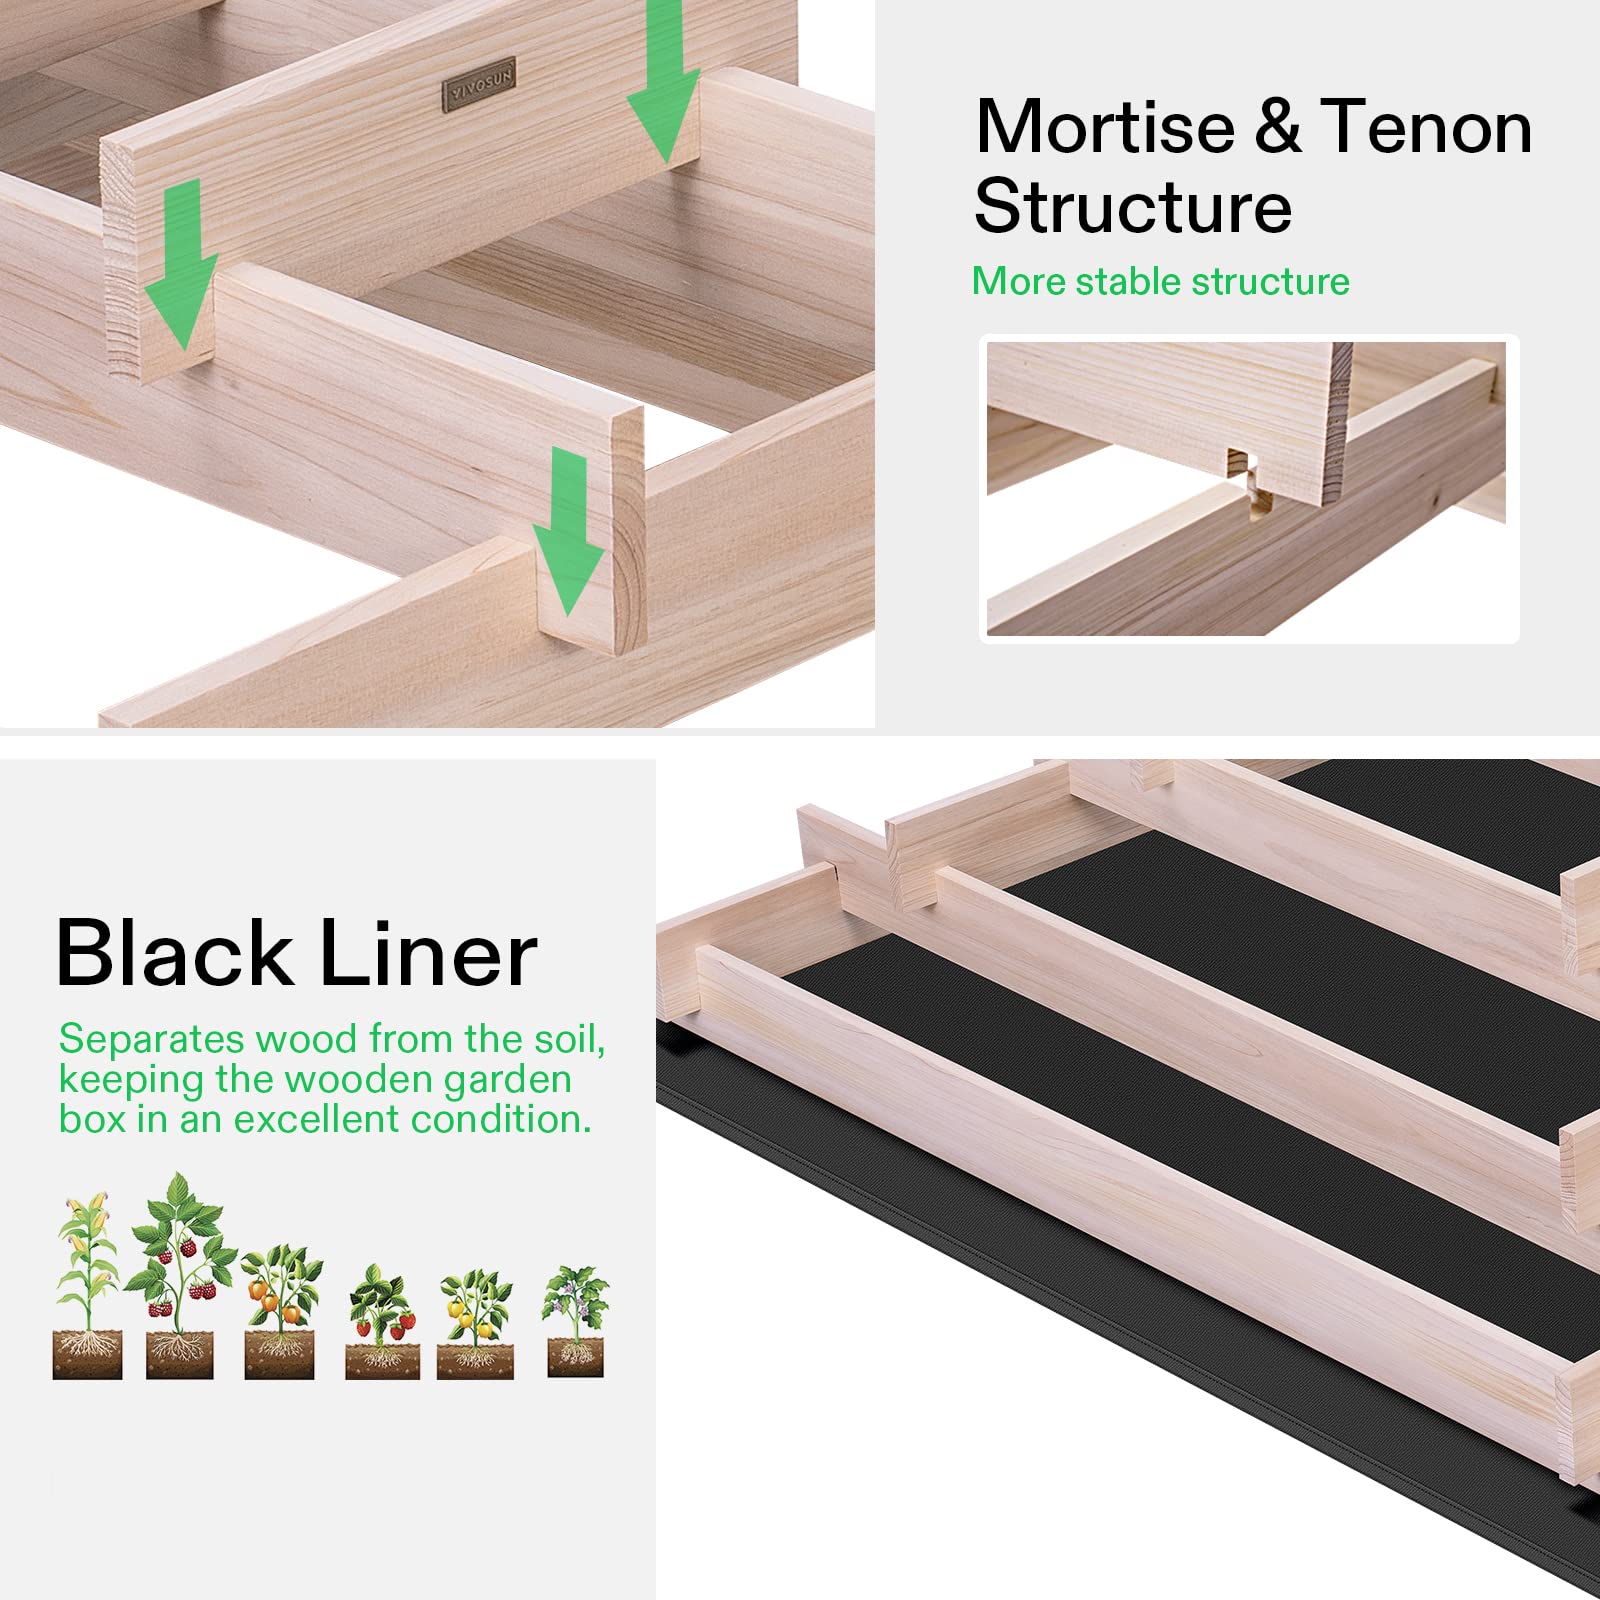 VIVOSUN 5-Tier Wooden Raised Garden Bed, 42 x 42 x 14 Inches, Outdoor Wood Planter Box with Gloves and Liner for Garden, Patio, Balcony, Backyard and Outdoors